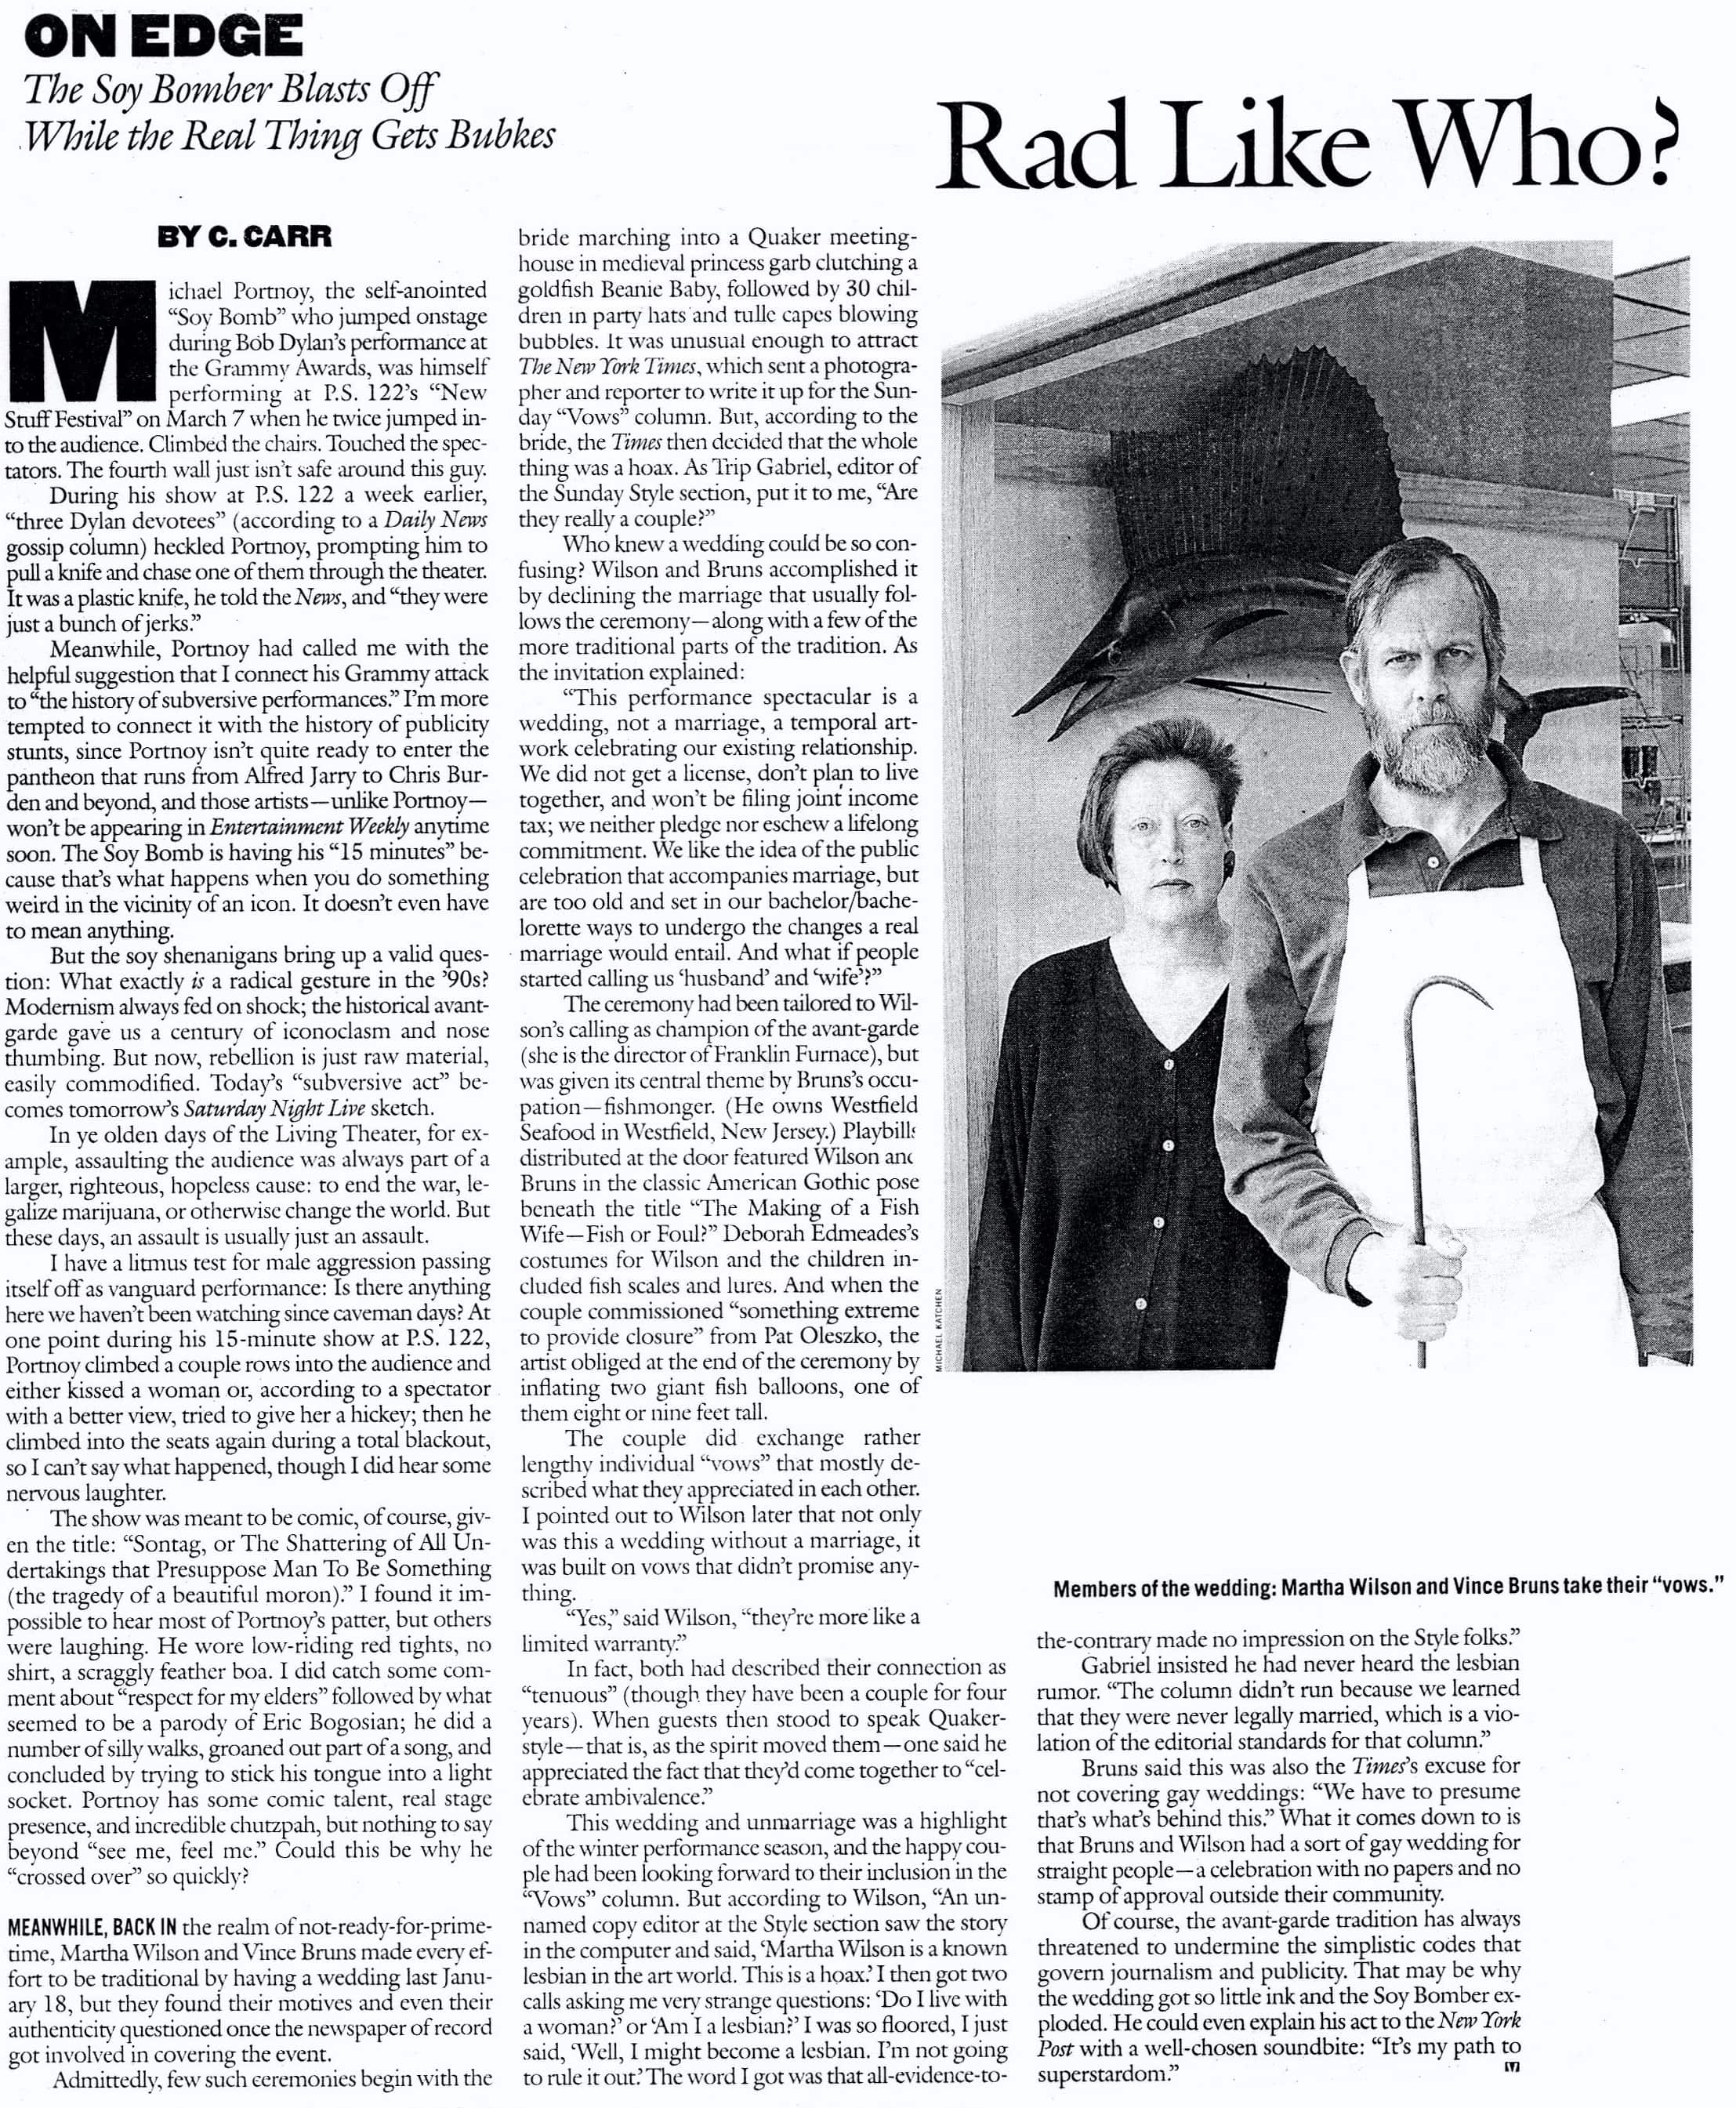 Photocopy of the original article in the Village Voice. See link above for text version